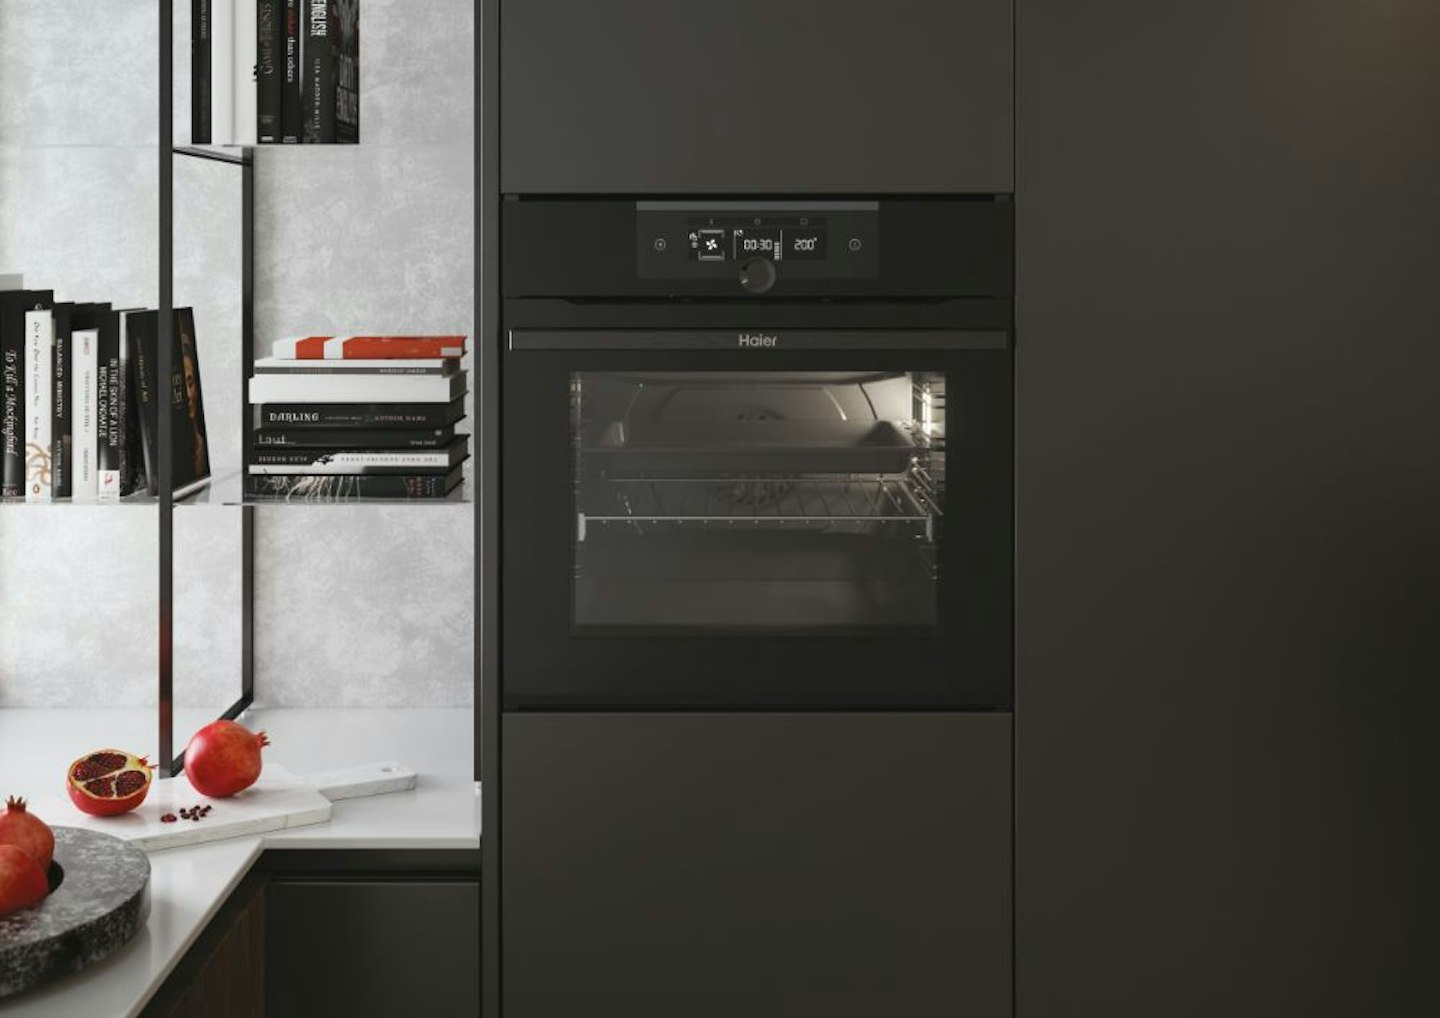 Oven I-Touch Series 6